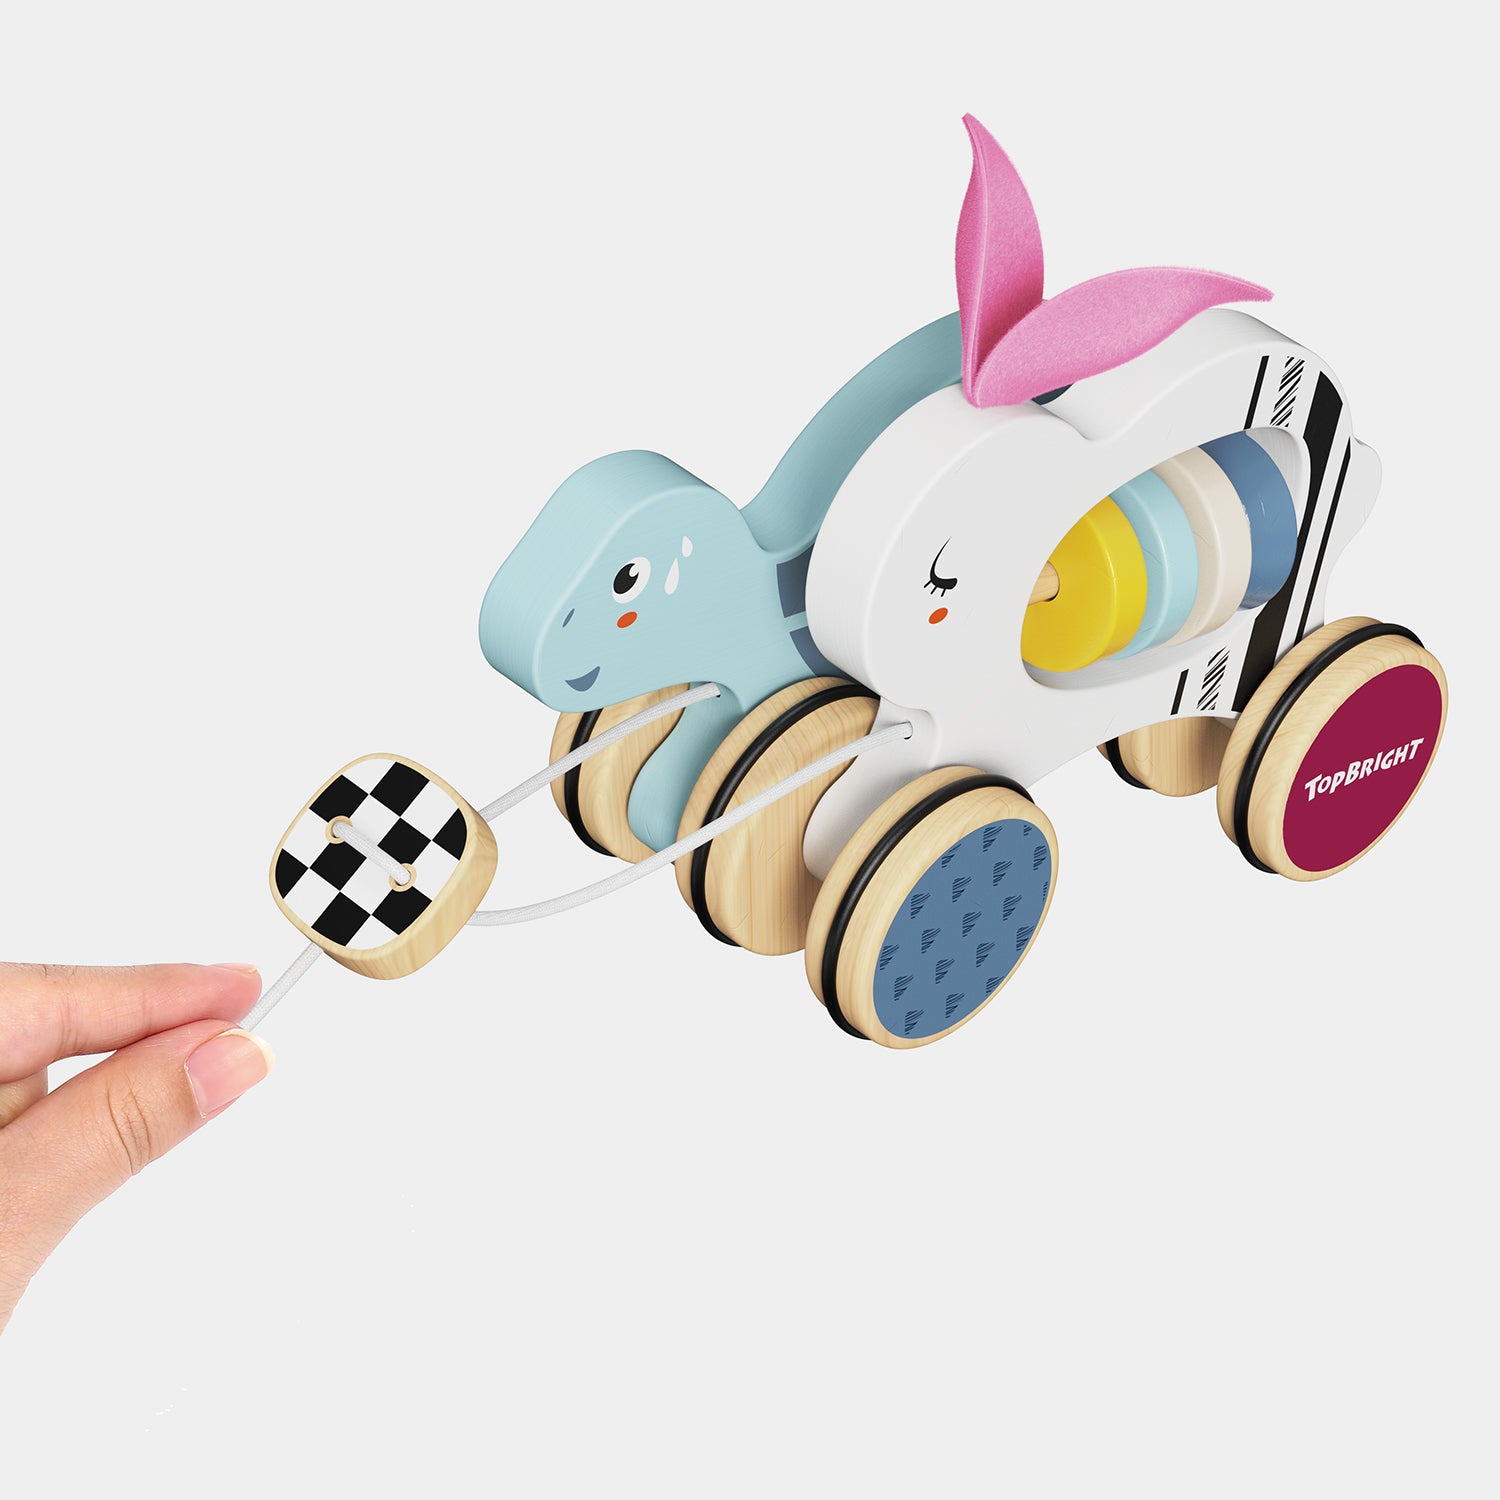 Cute pull-along toy: Who will win the race, the hare or the tortoise? The innovative pull-along toy “The Hare and the Tortoise